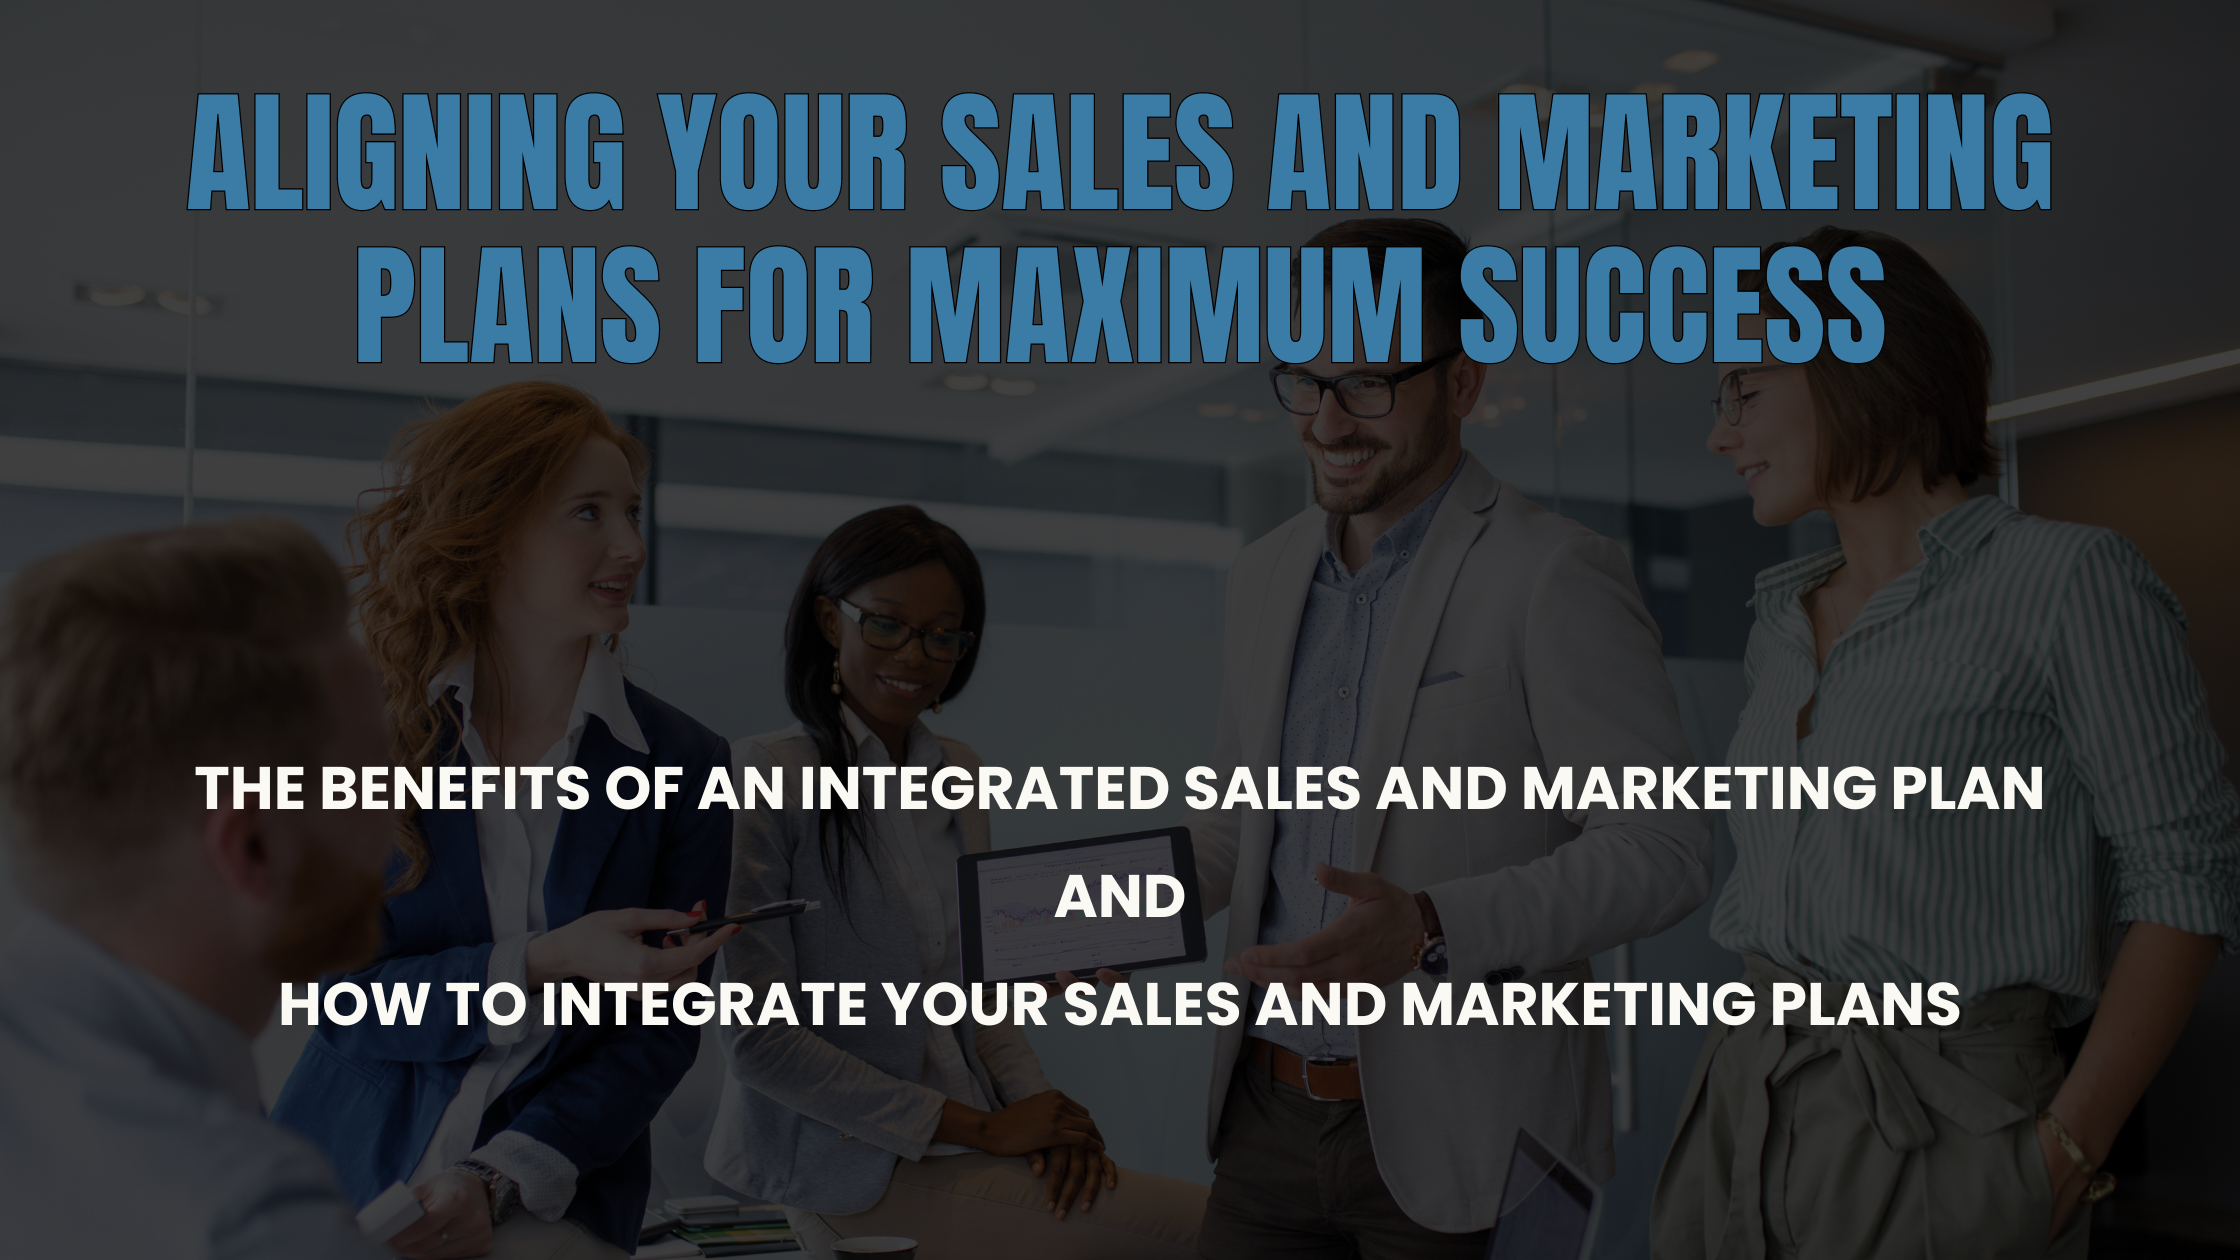 Aligning Your Sales and Marketing Plans for Maximum Success - Benefits to Integrating Sales and Marketing Plans AND How to integrate your Sales and Marketing Plans